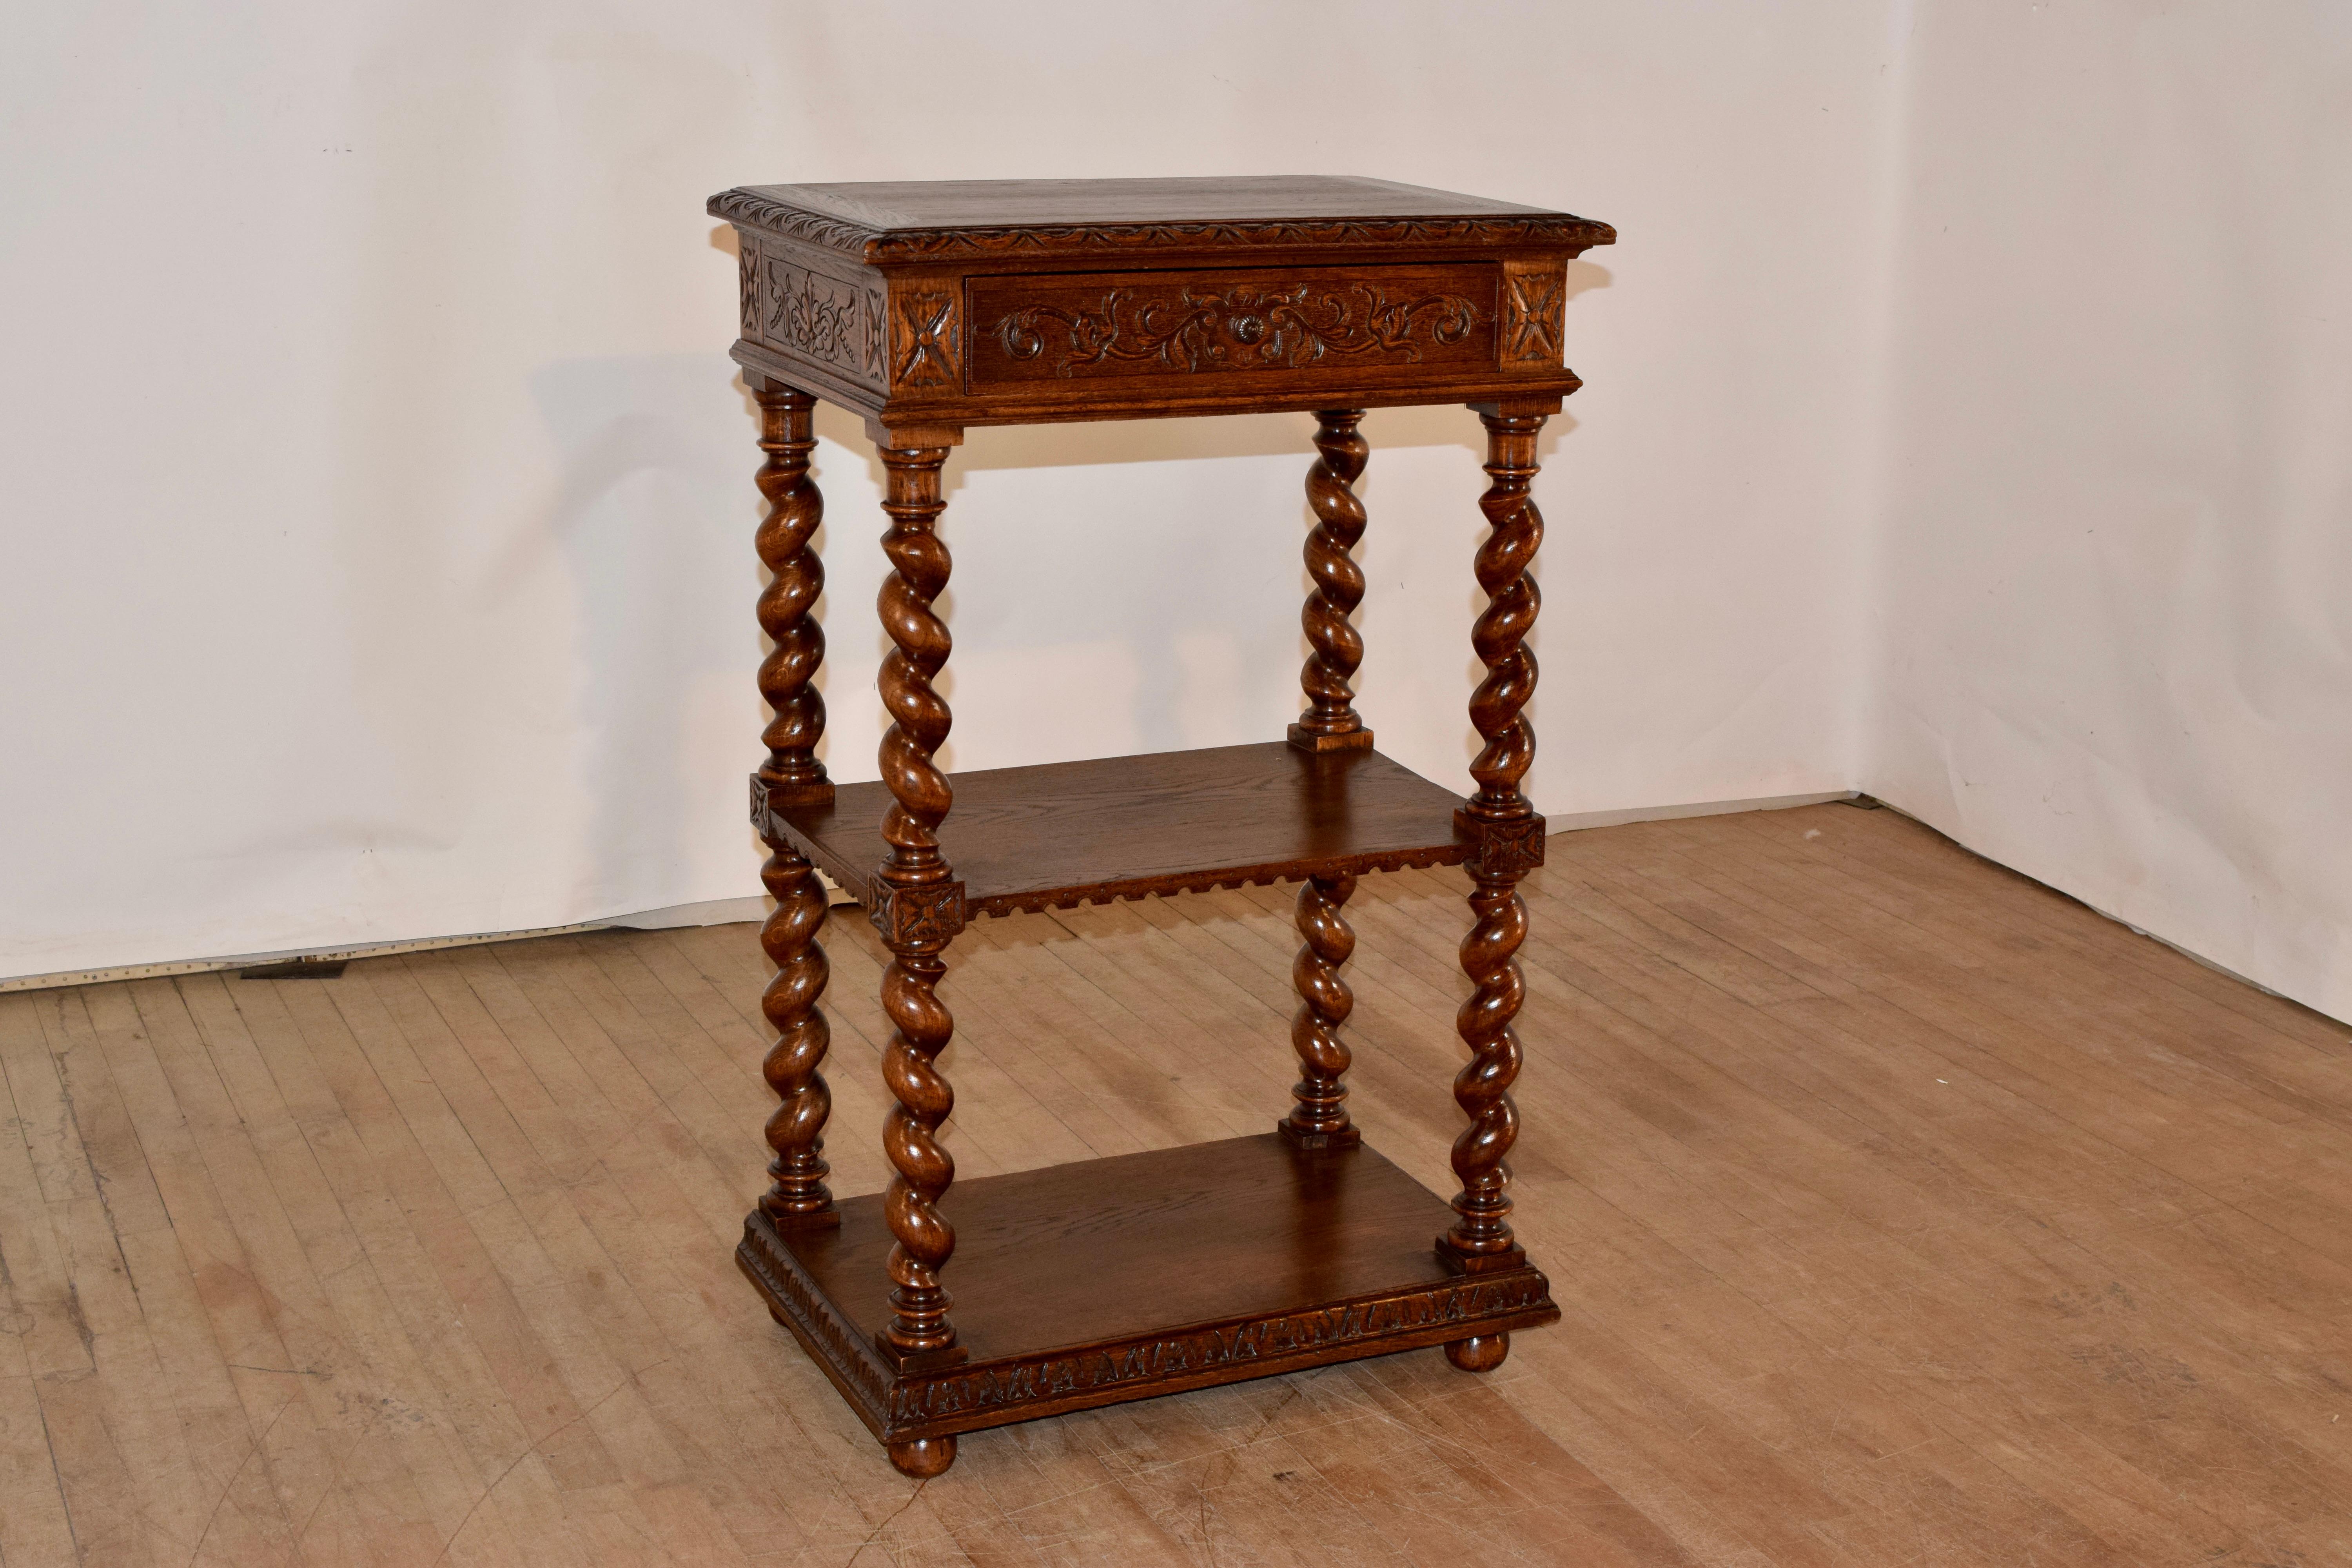 19th century oak small buffet from France. The top has a beveled edge which is carved decorated as well. The sides are hand-carved decorated and contain a single drawer in the front. The piece has hand turned barley twist legs, joined by two